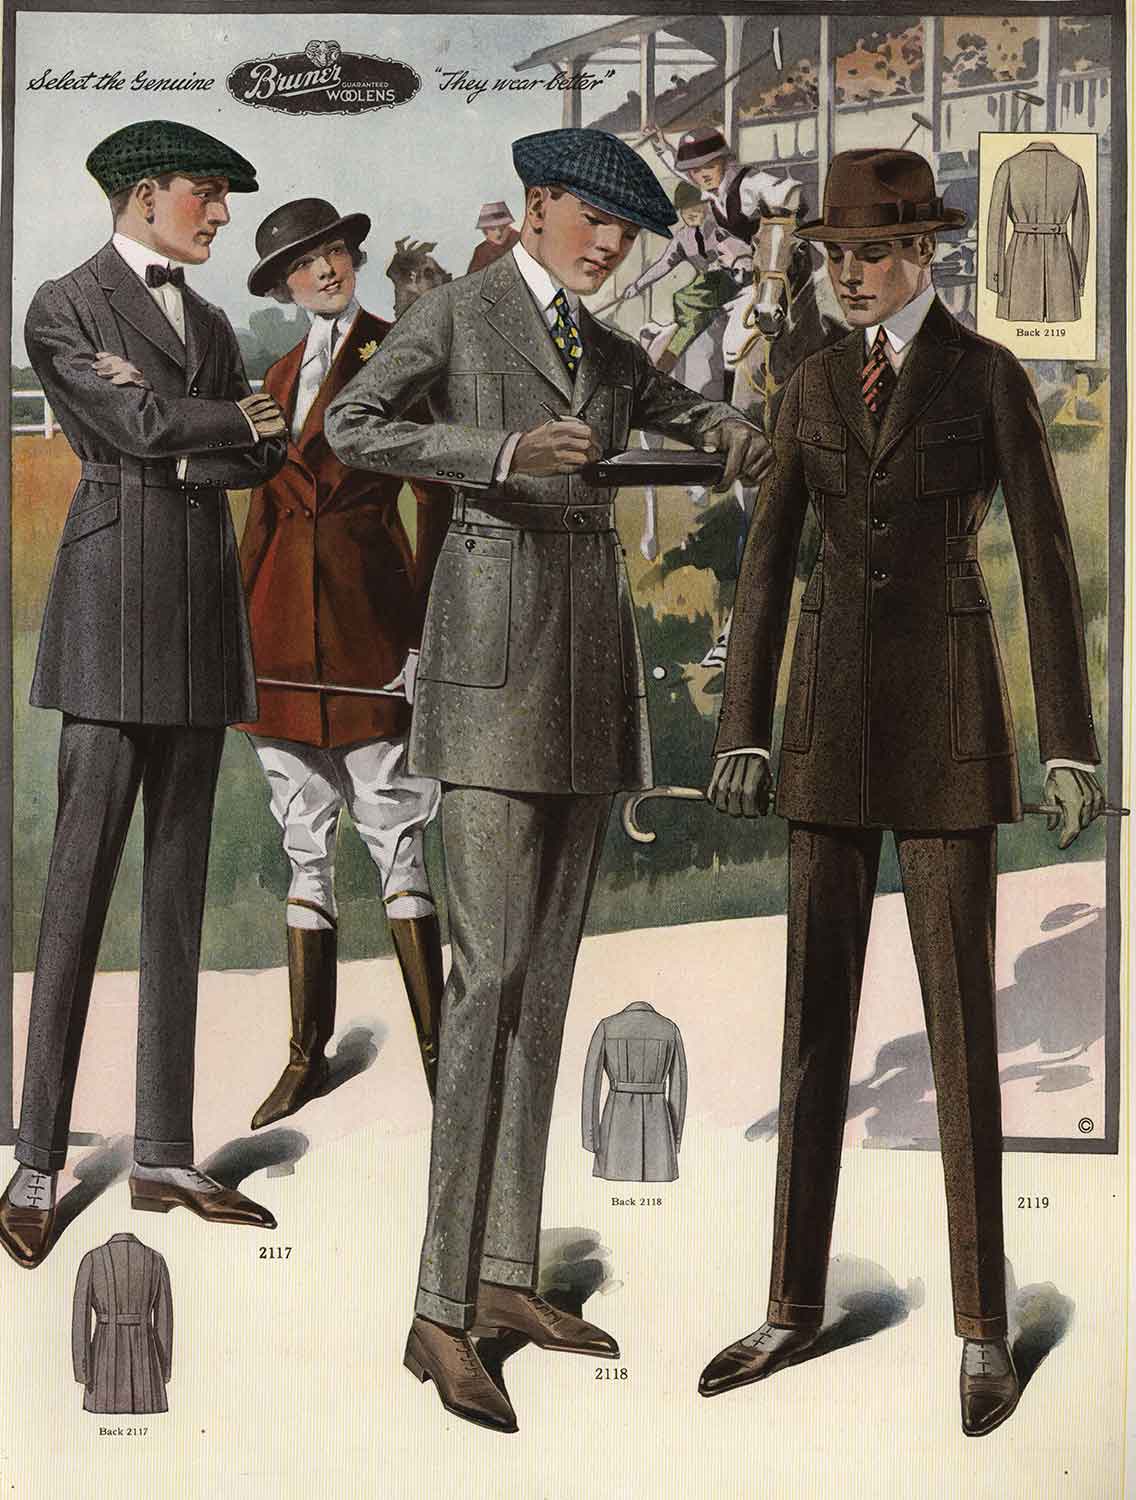 Men dressed casually in the 1920s